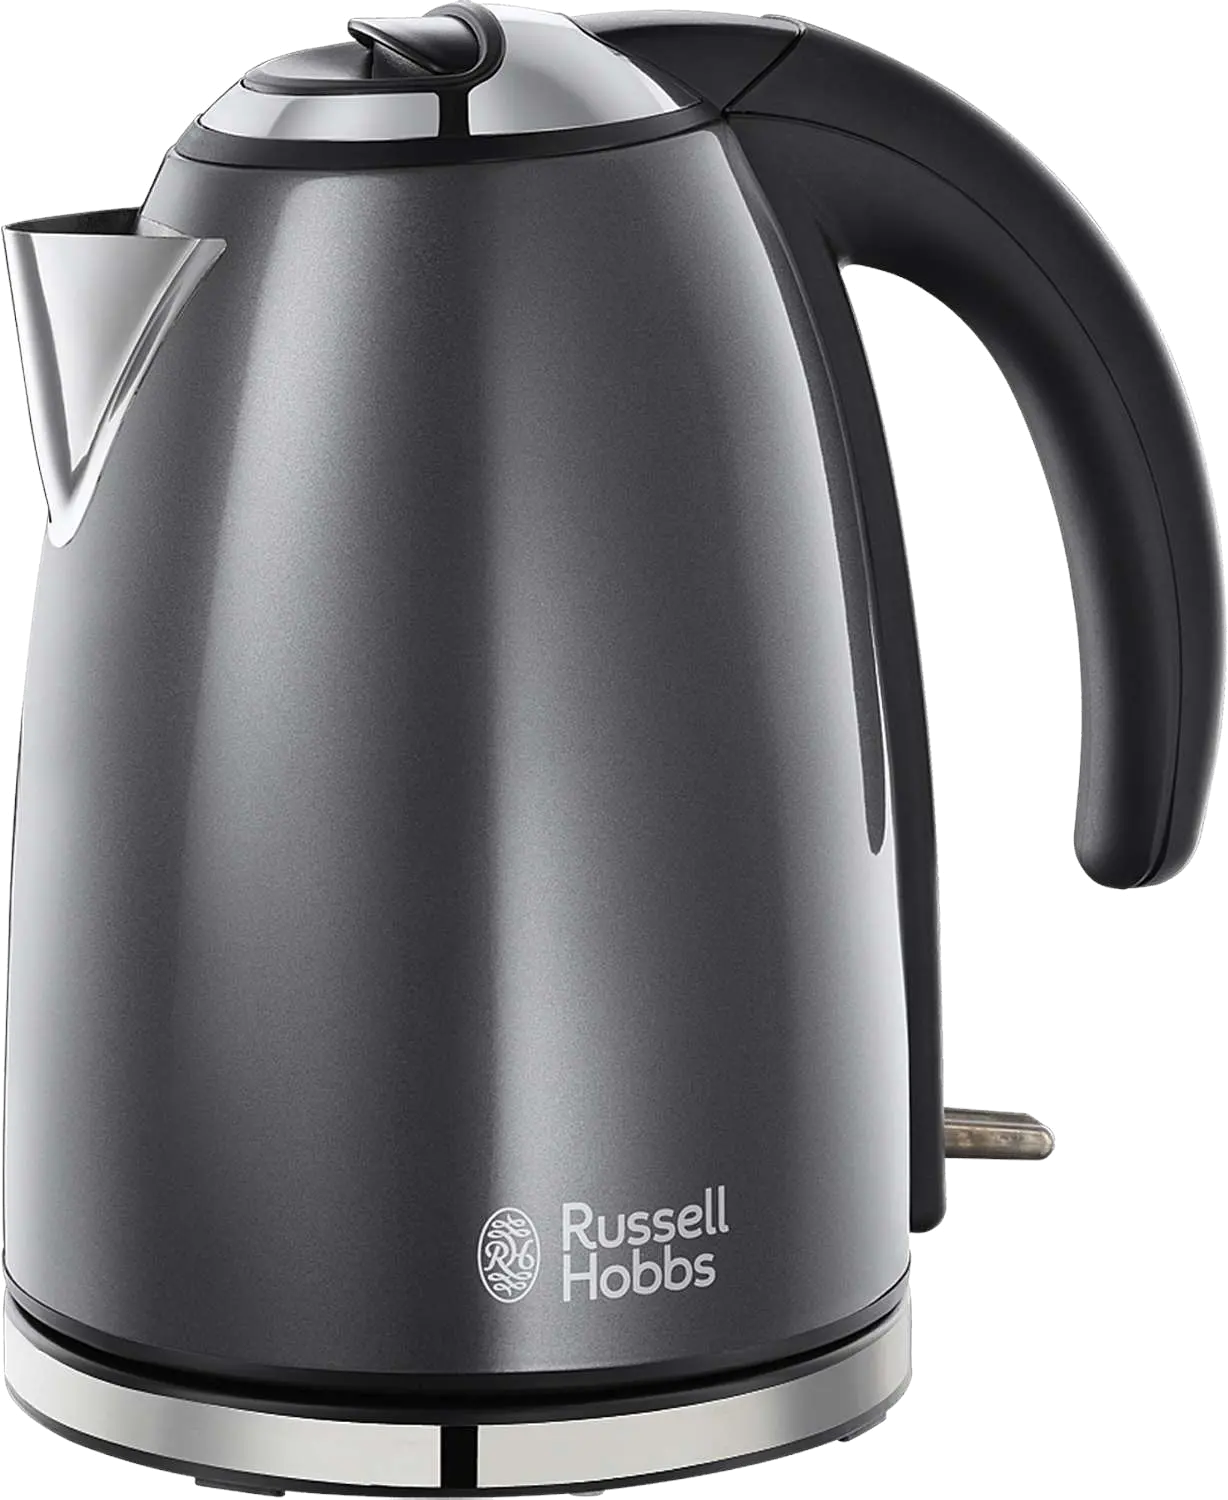 Kettle Png Images Kettle Png Teapot Png